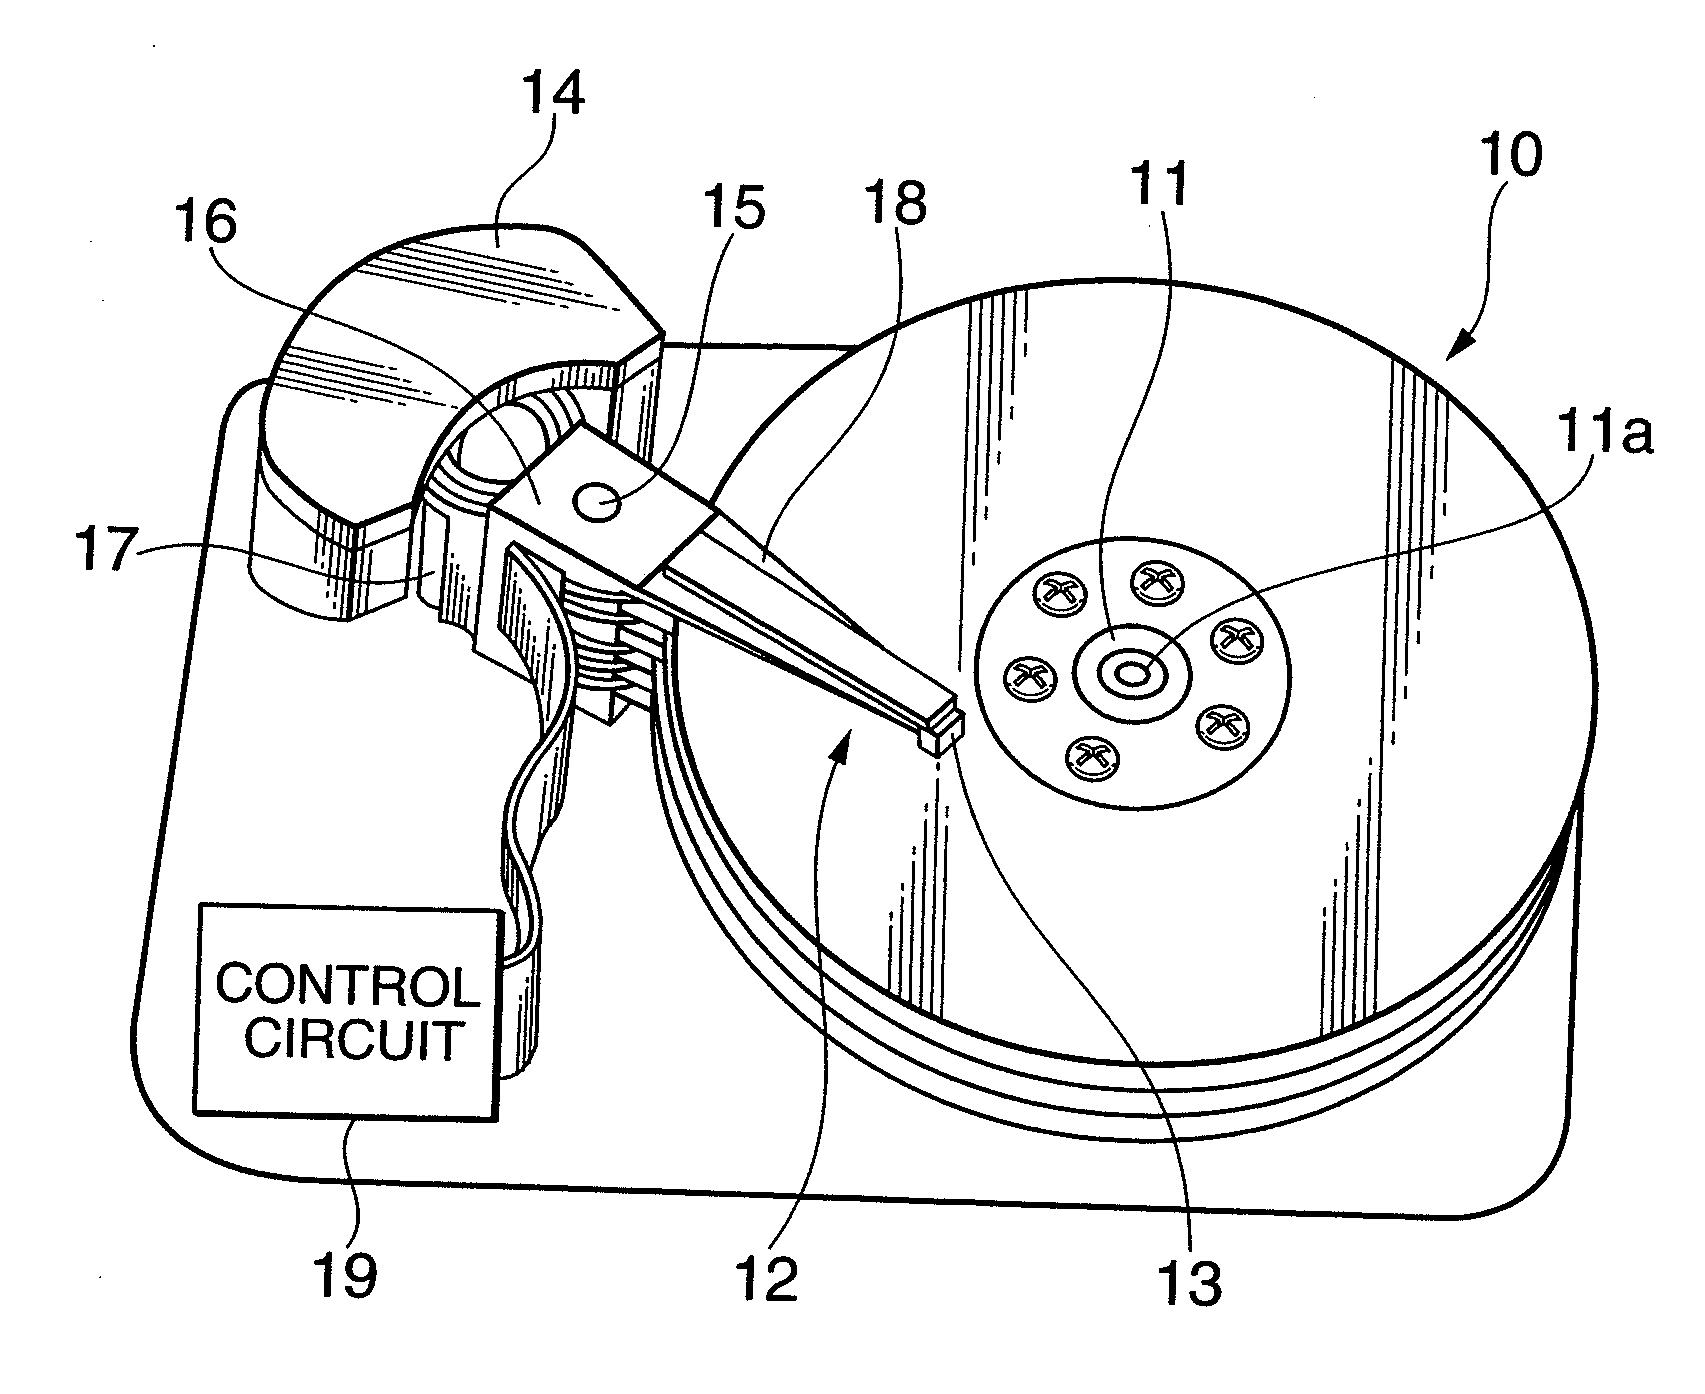 Magnetic Recording Apparatus Provided with Microwave-Assisted Head